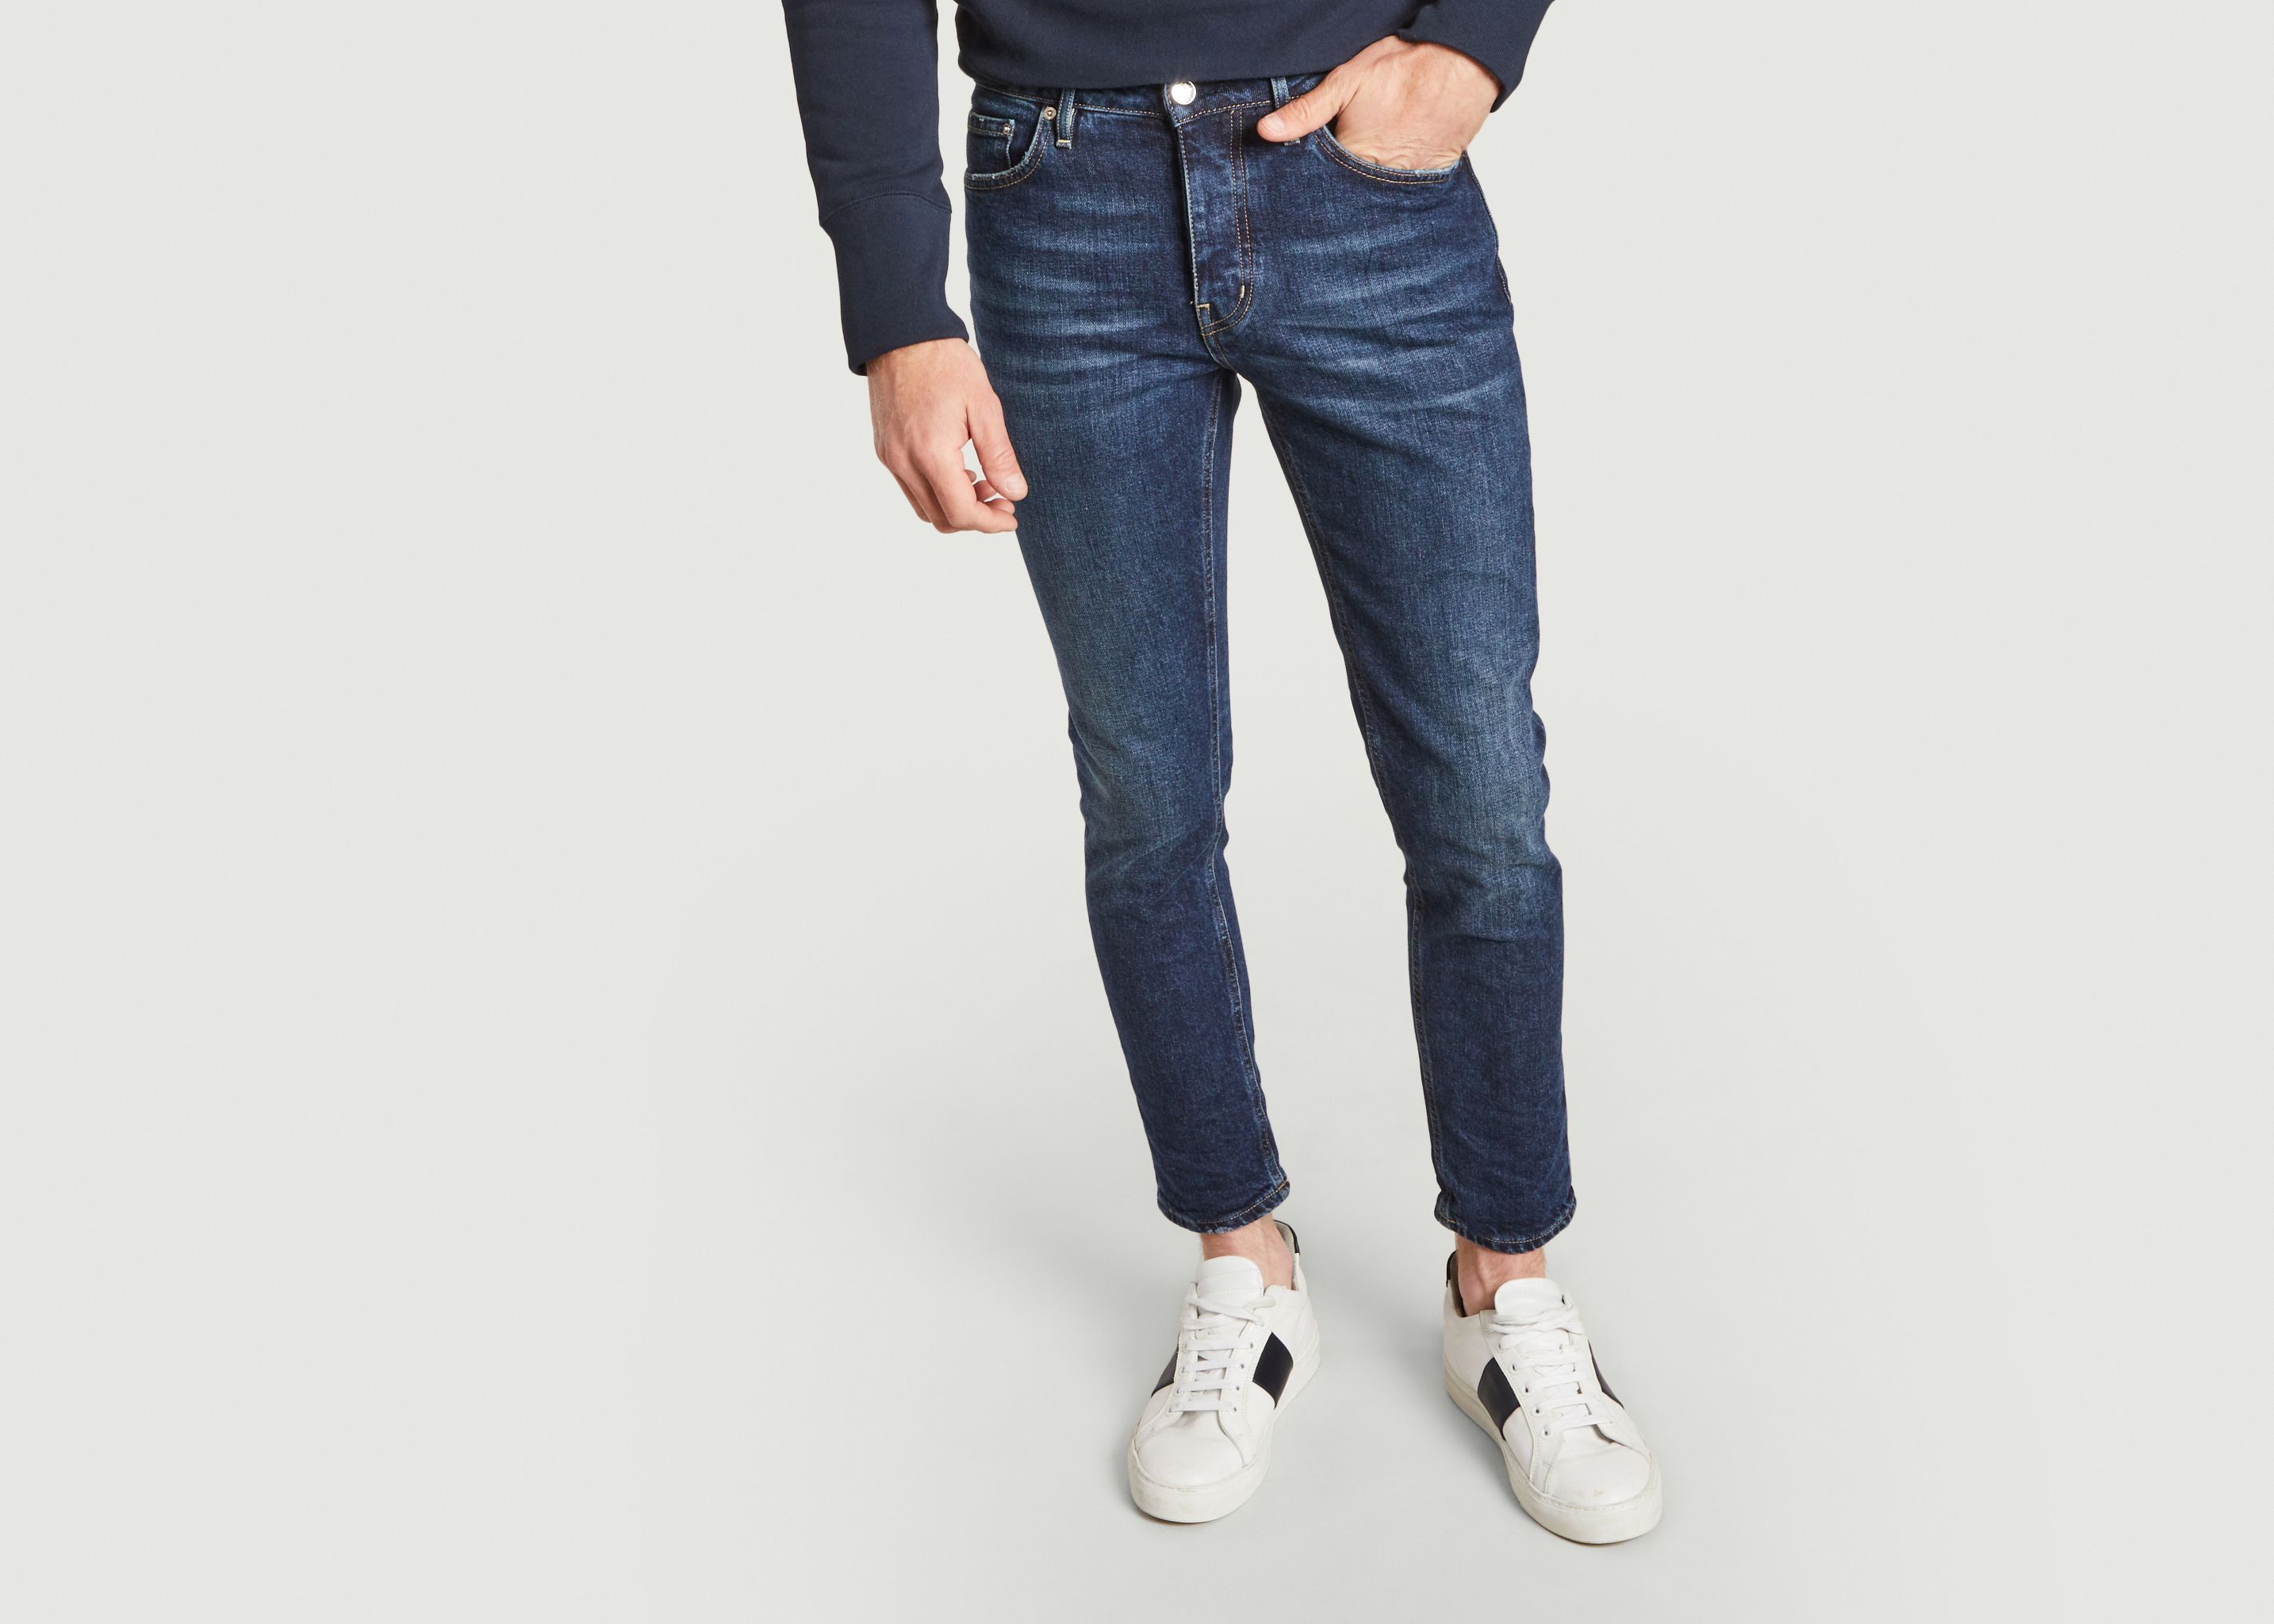 Cropped Skinny Jeans Cleveland - haikure